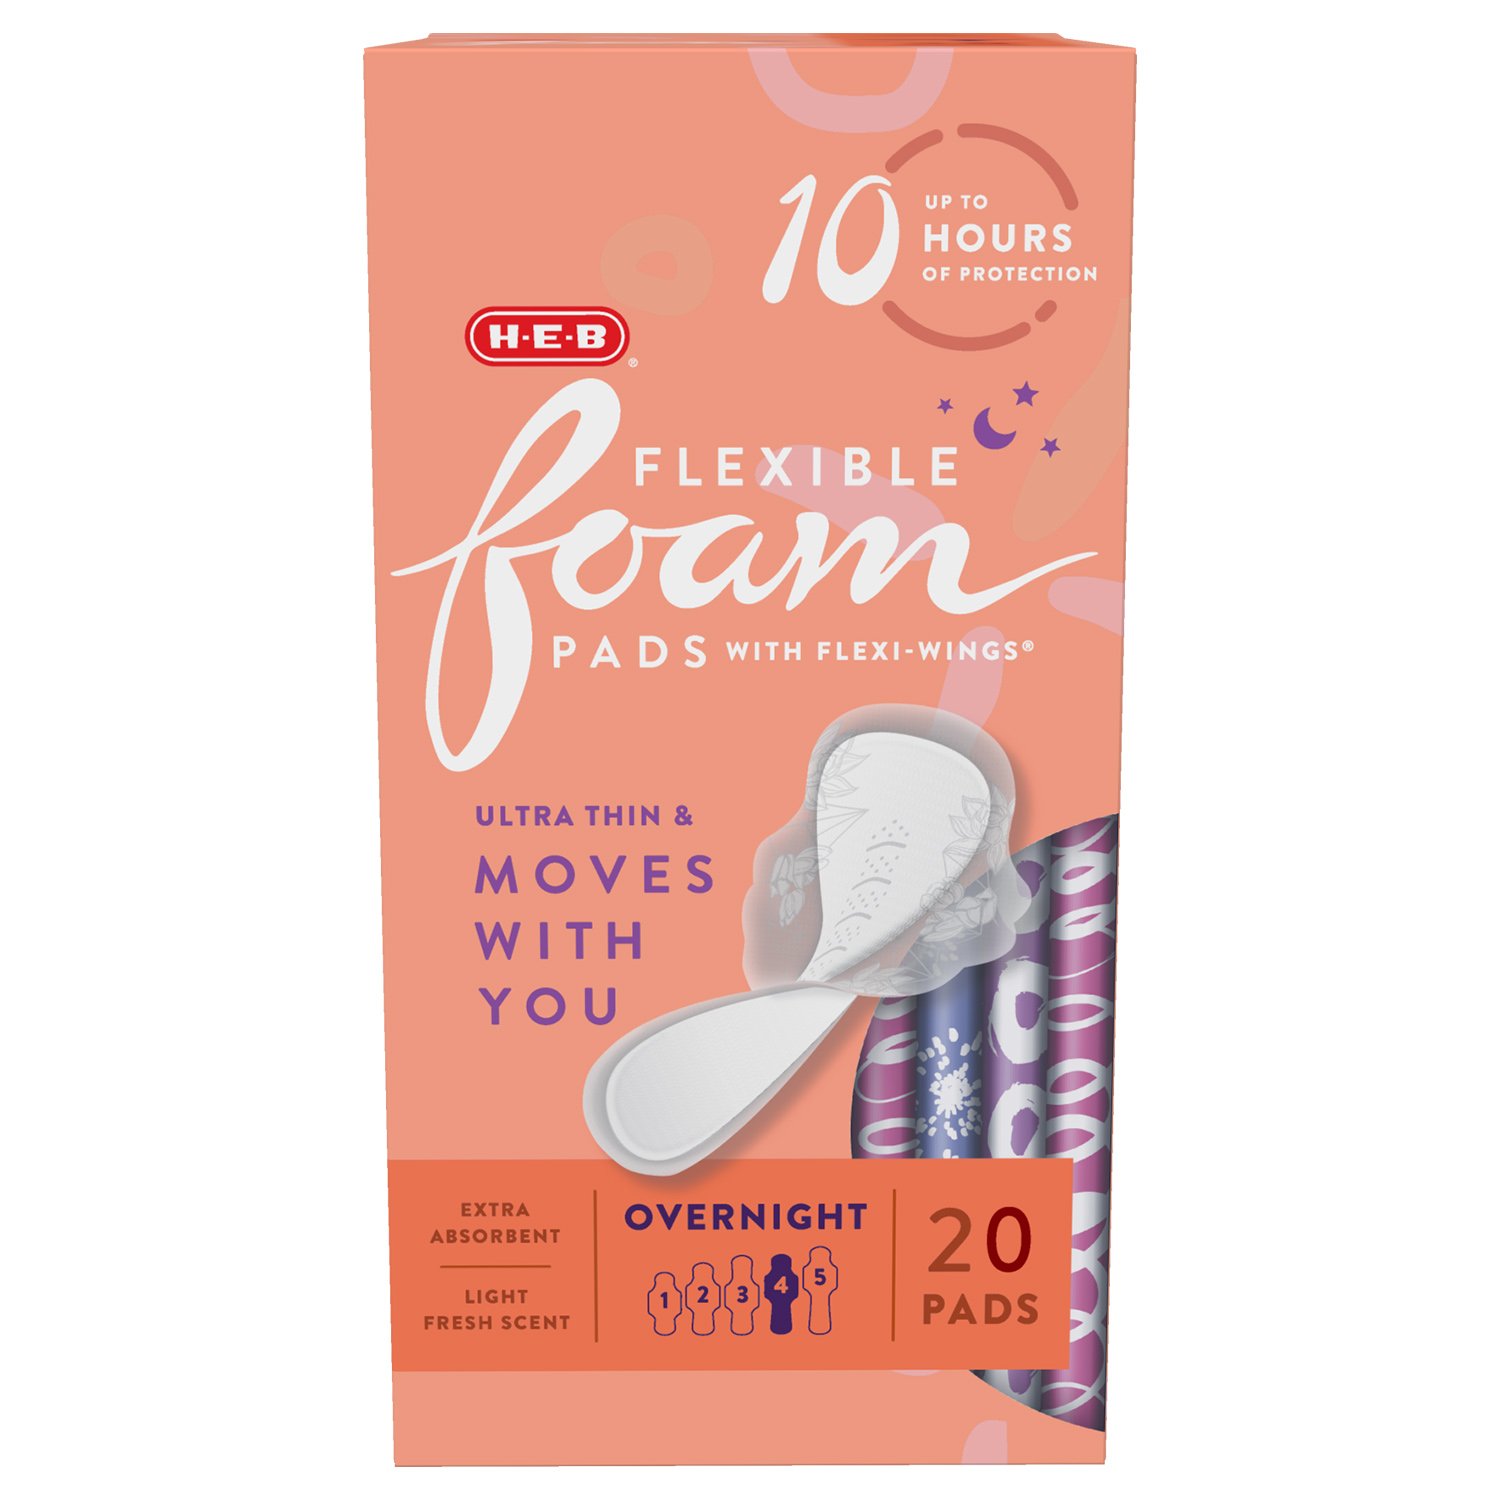 H-E-B Flexible Foam Pads with Flexi-Wings - Overnight - Shop Pads & Liners  at H-E-B